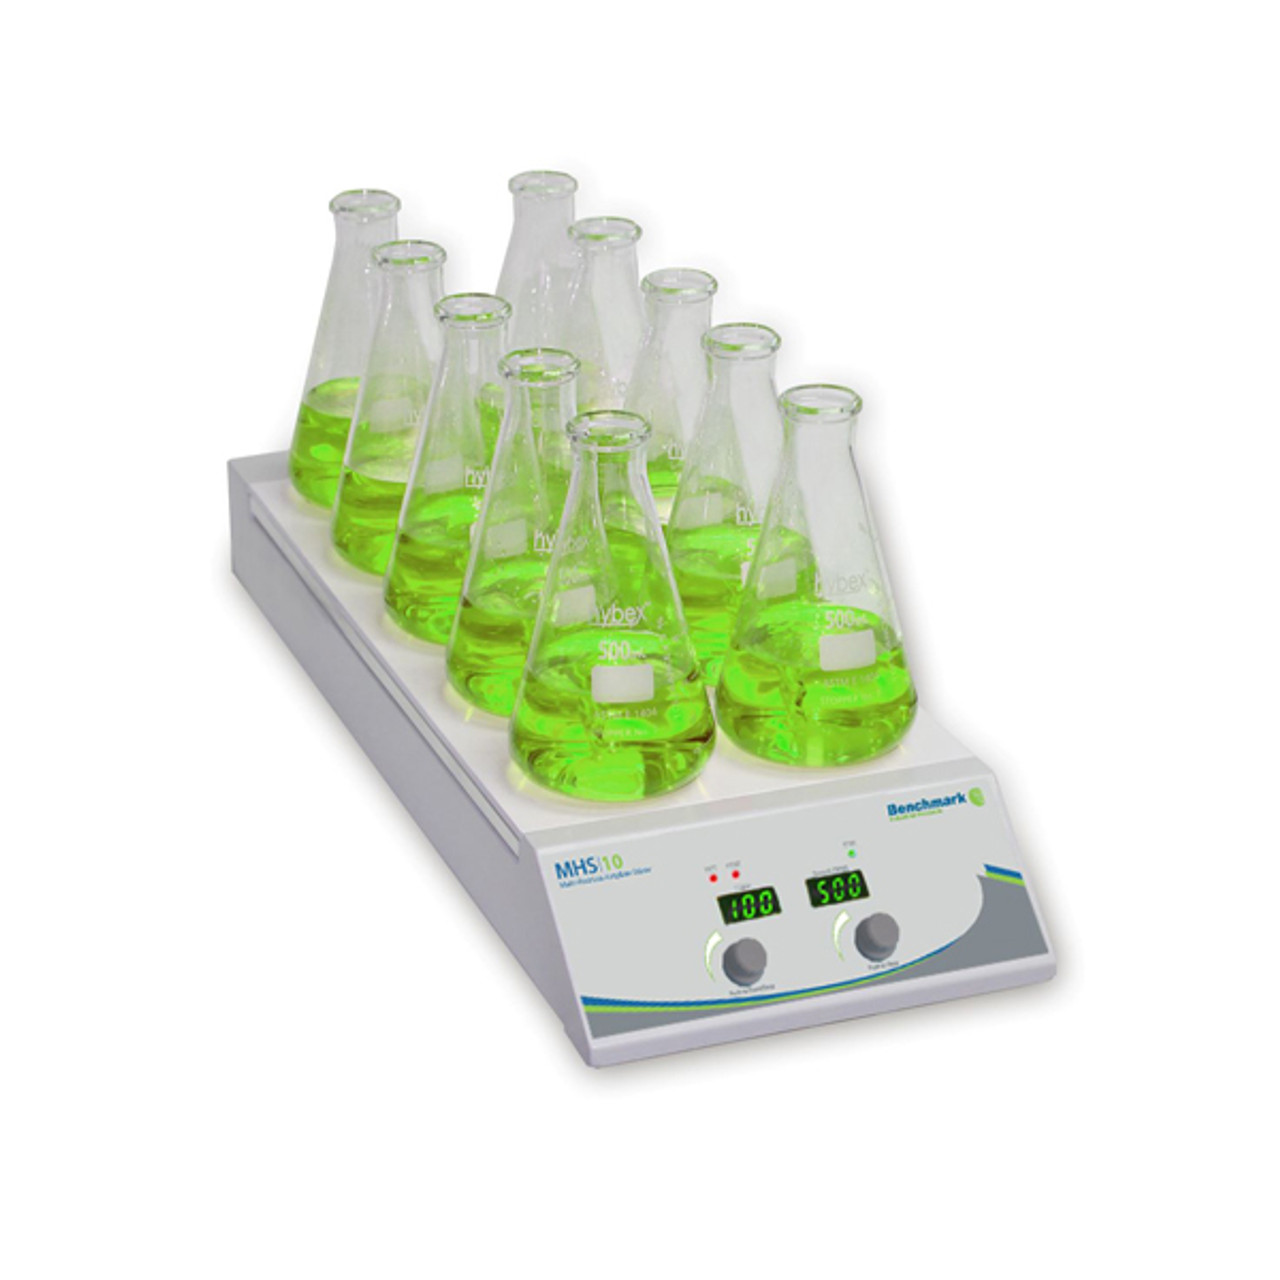 https://cdn11.bigcommerce.com/s-w9bdixgj/images/stencil/1280x1280/products/5400/11469/Ten_Position_Magnetic_Stirrer_And_Hotplate_IPS7000-10_With_Ceramic_Top_And_120C_Top_Temperature_-_Lab_Equipment_-_Stellar_Scientific__24219.1664735783.jpg?c=2